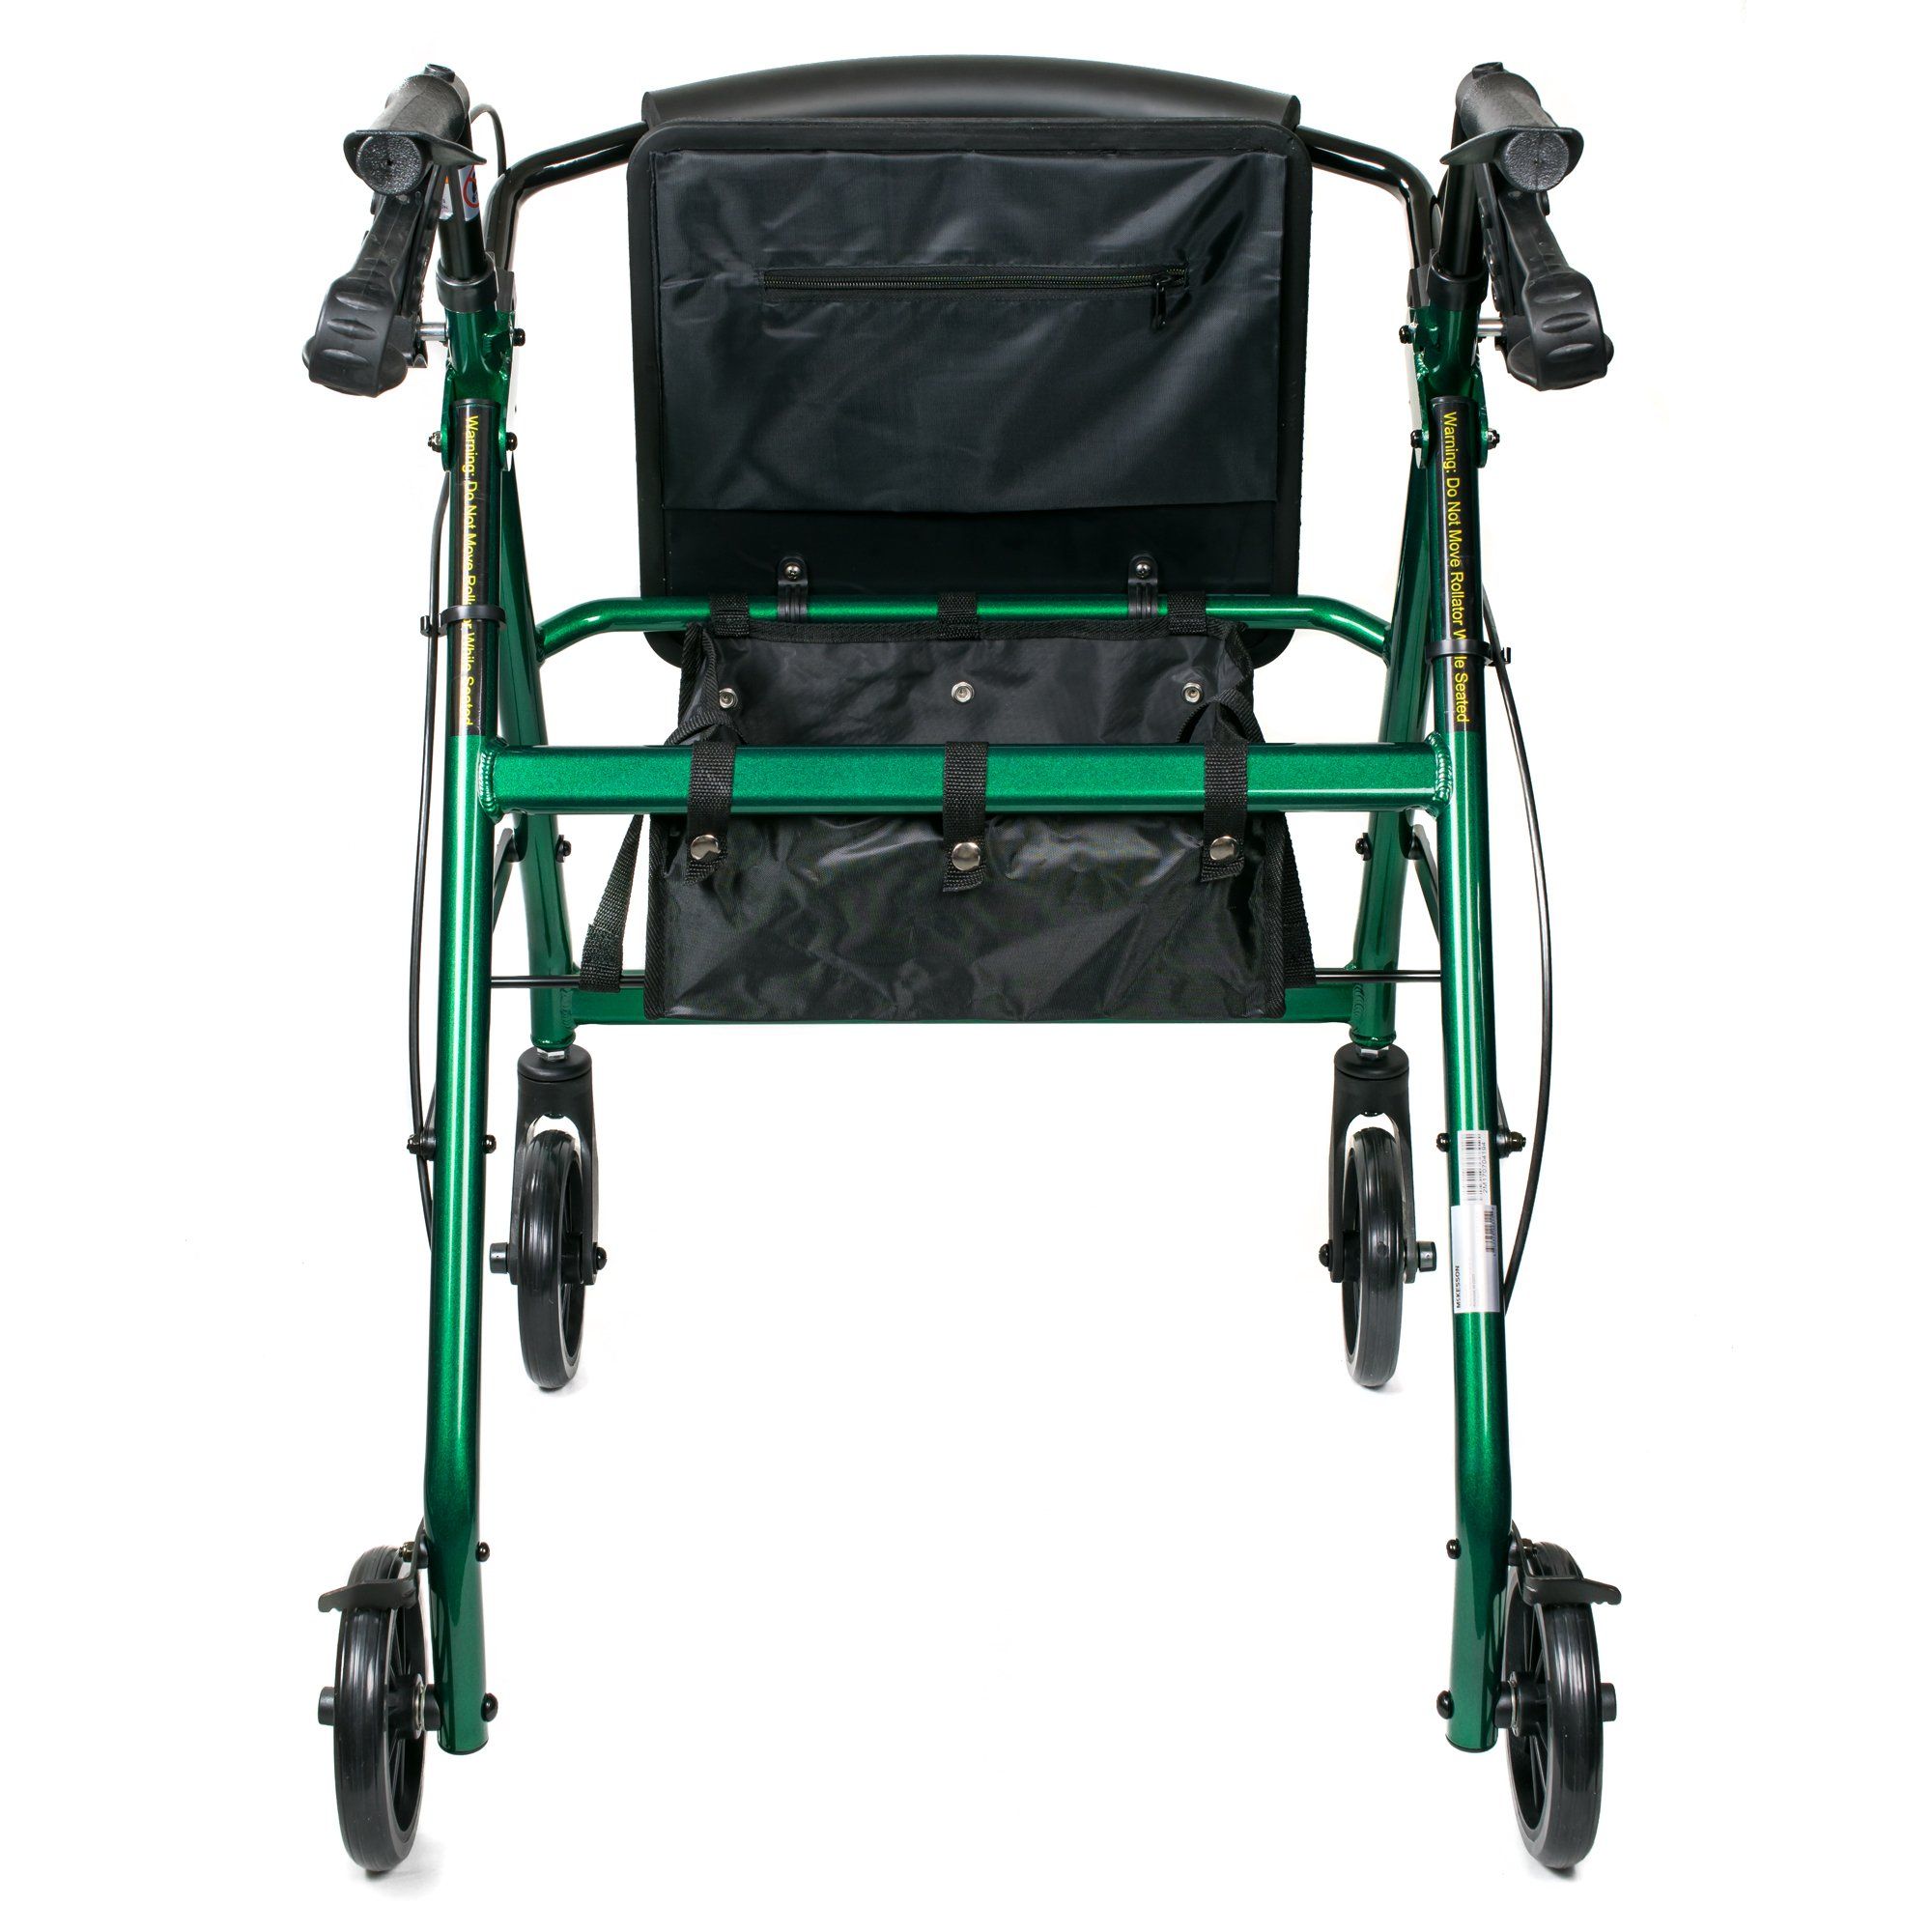 McKesson Rollator Walker with Seat, Green - 300 lbs Capacity